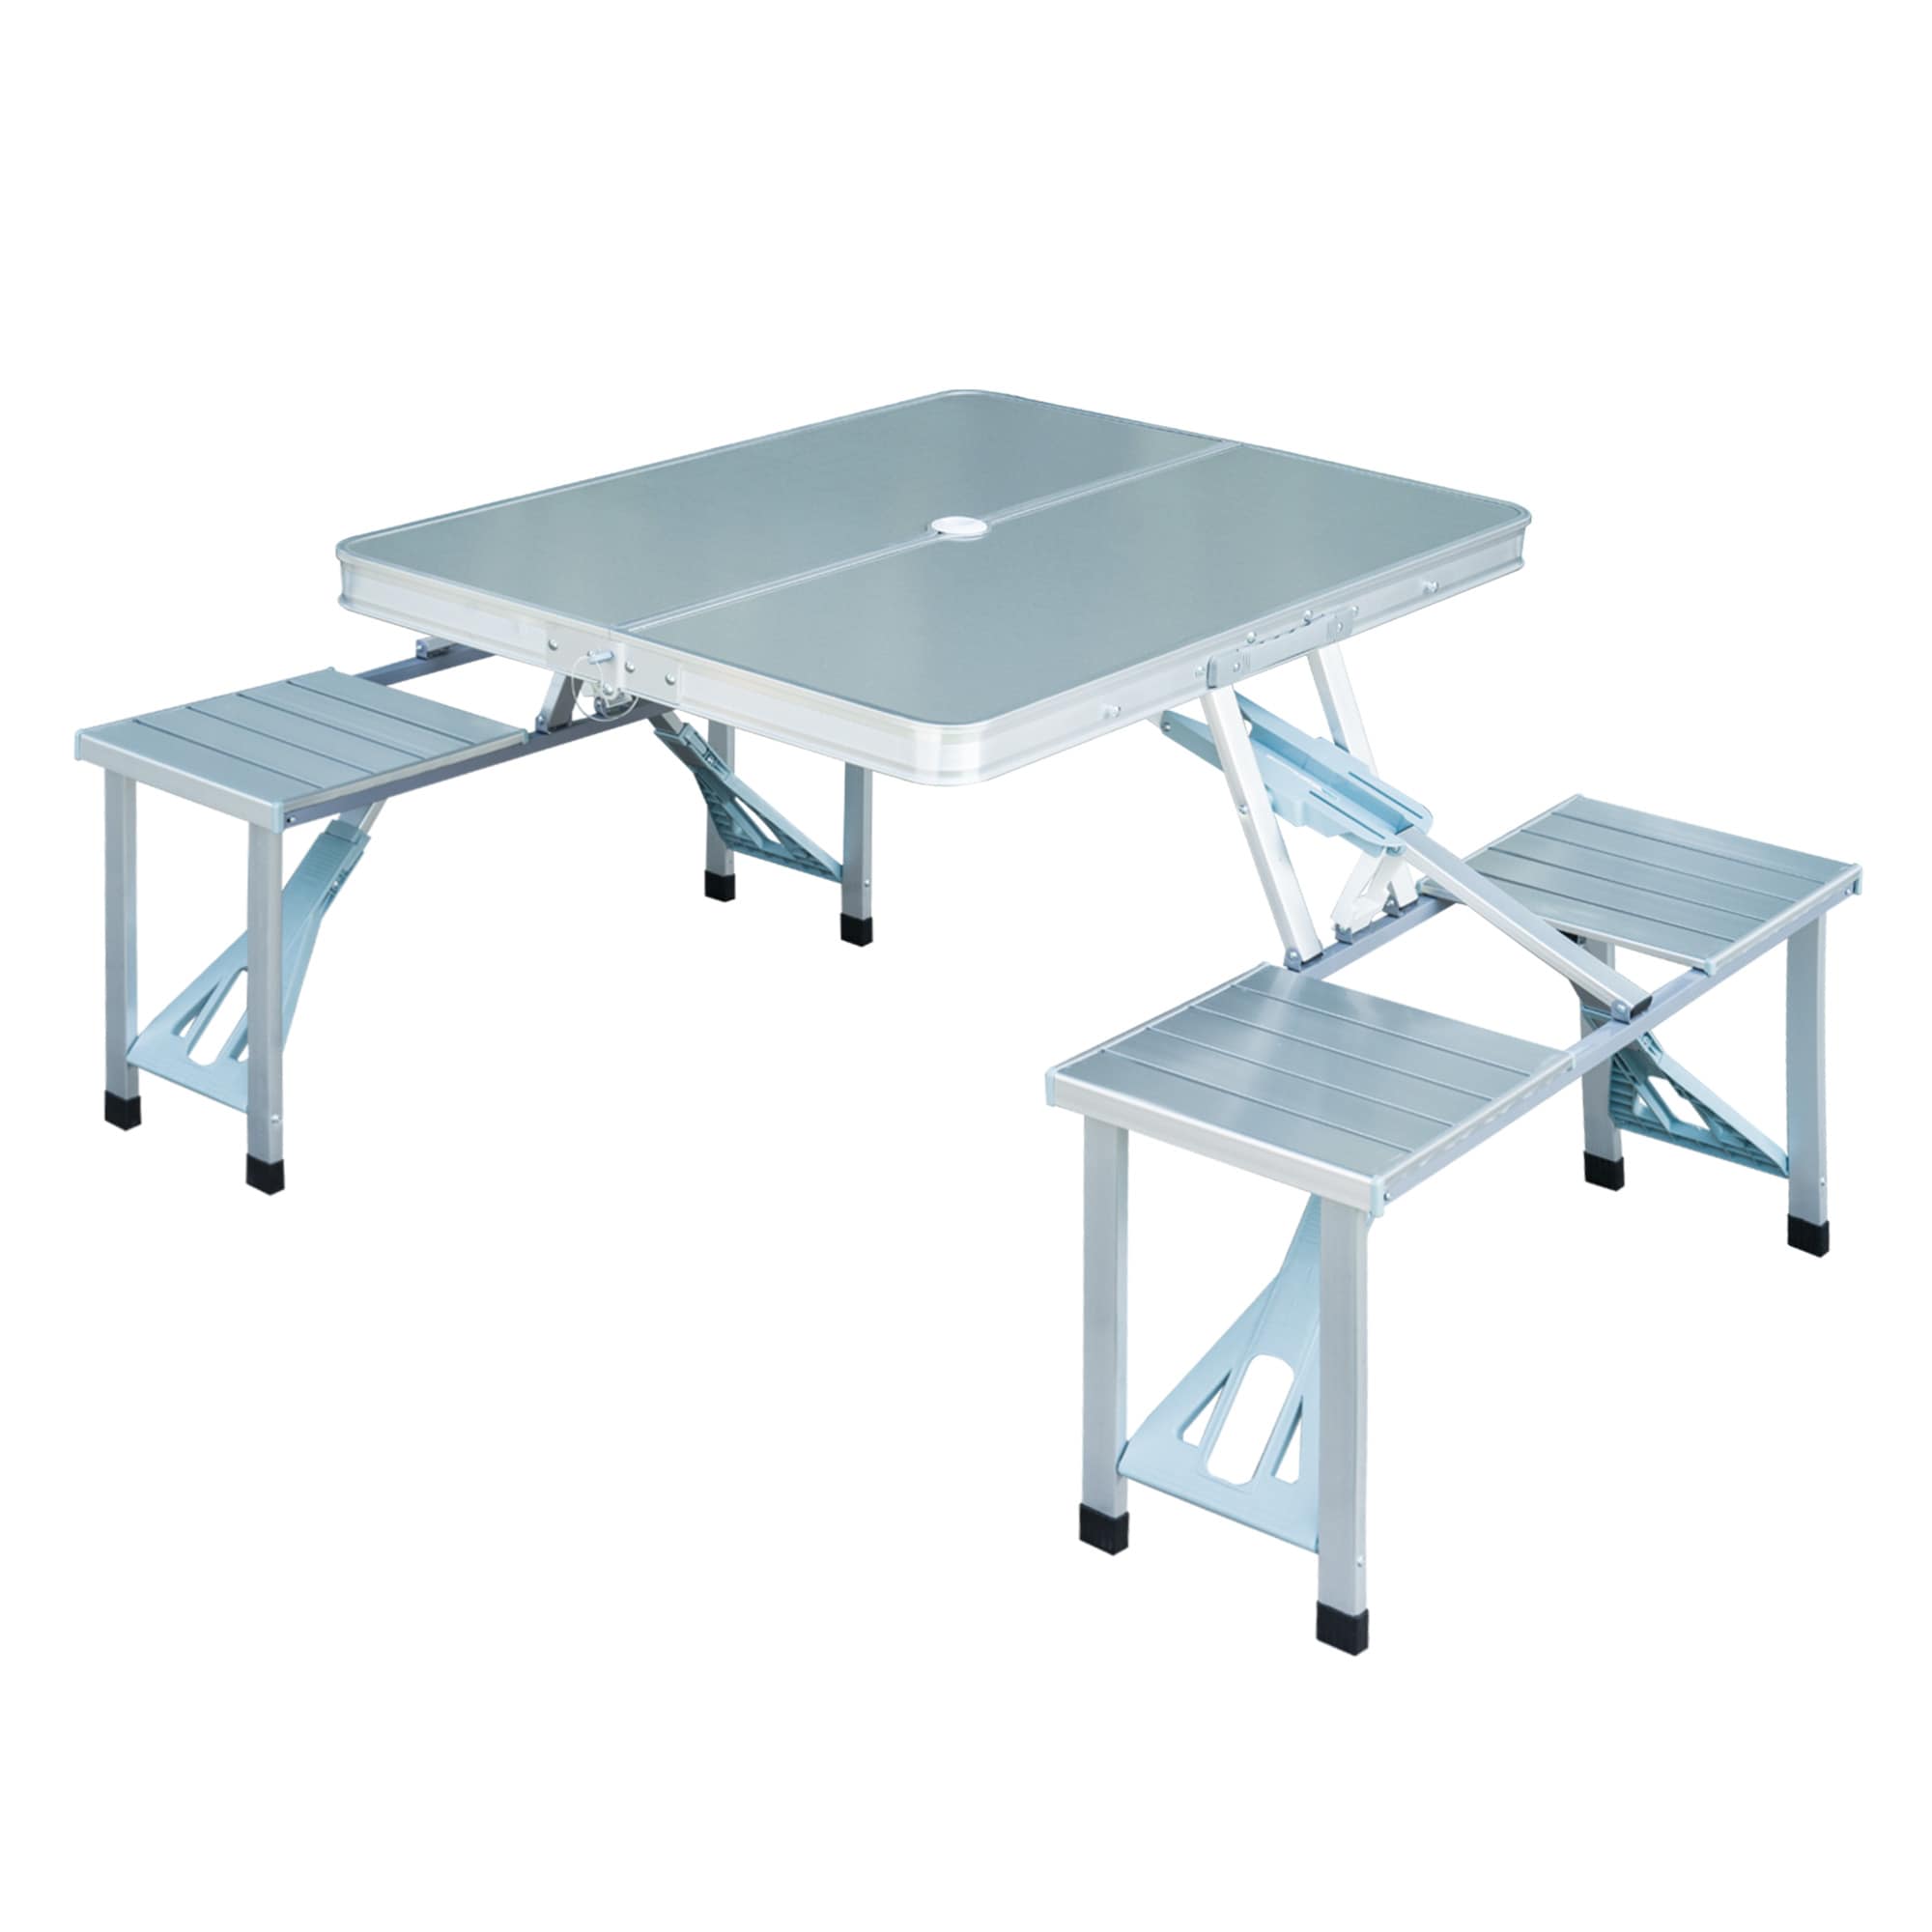 One-Piece Folding Camping Picnic Table 4 Seats Bench Aluminum Portable Suitcase 